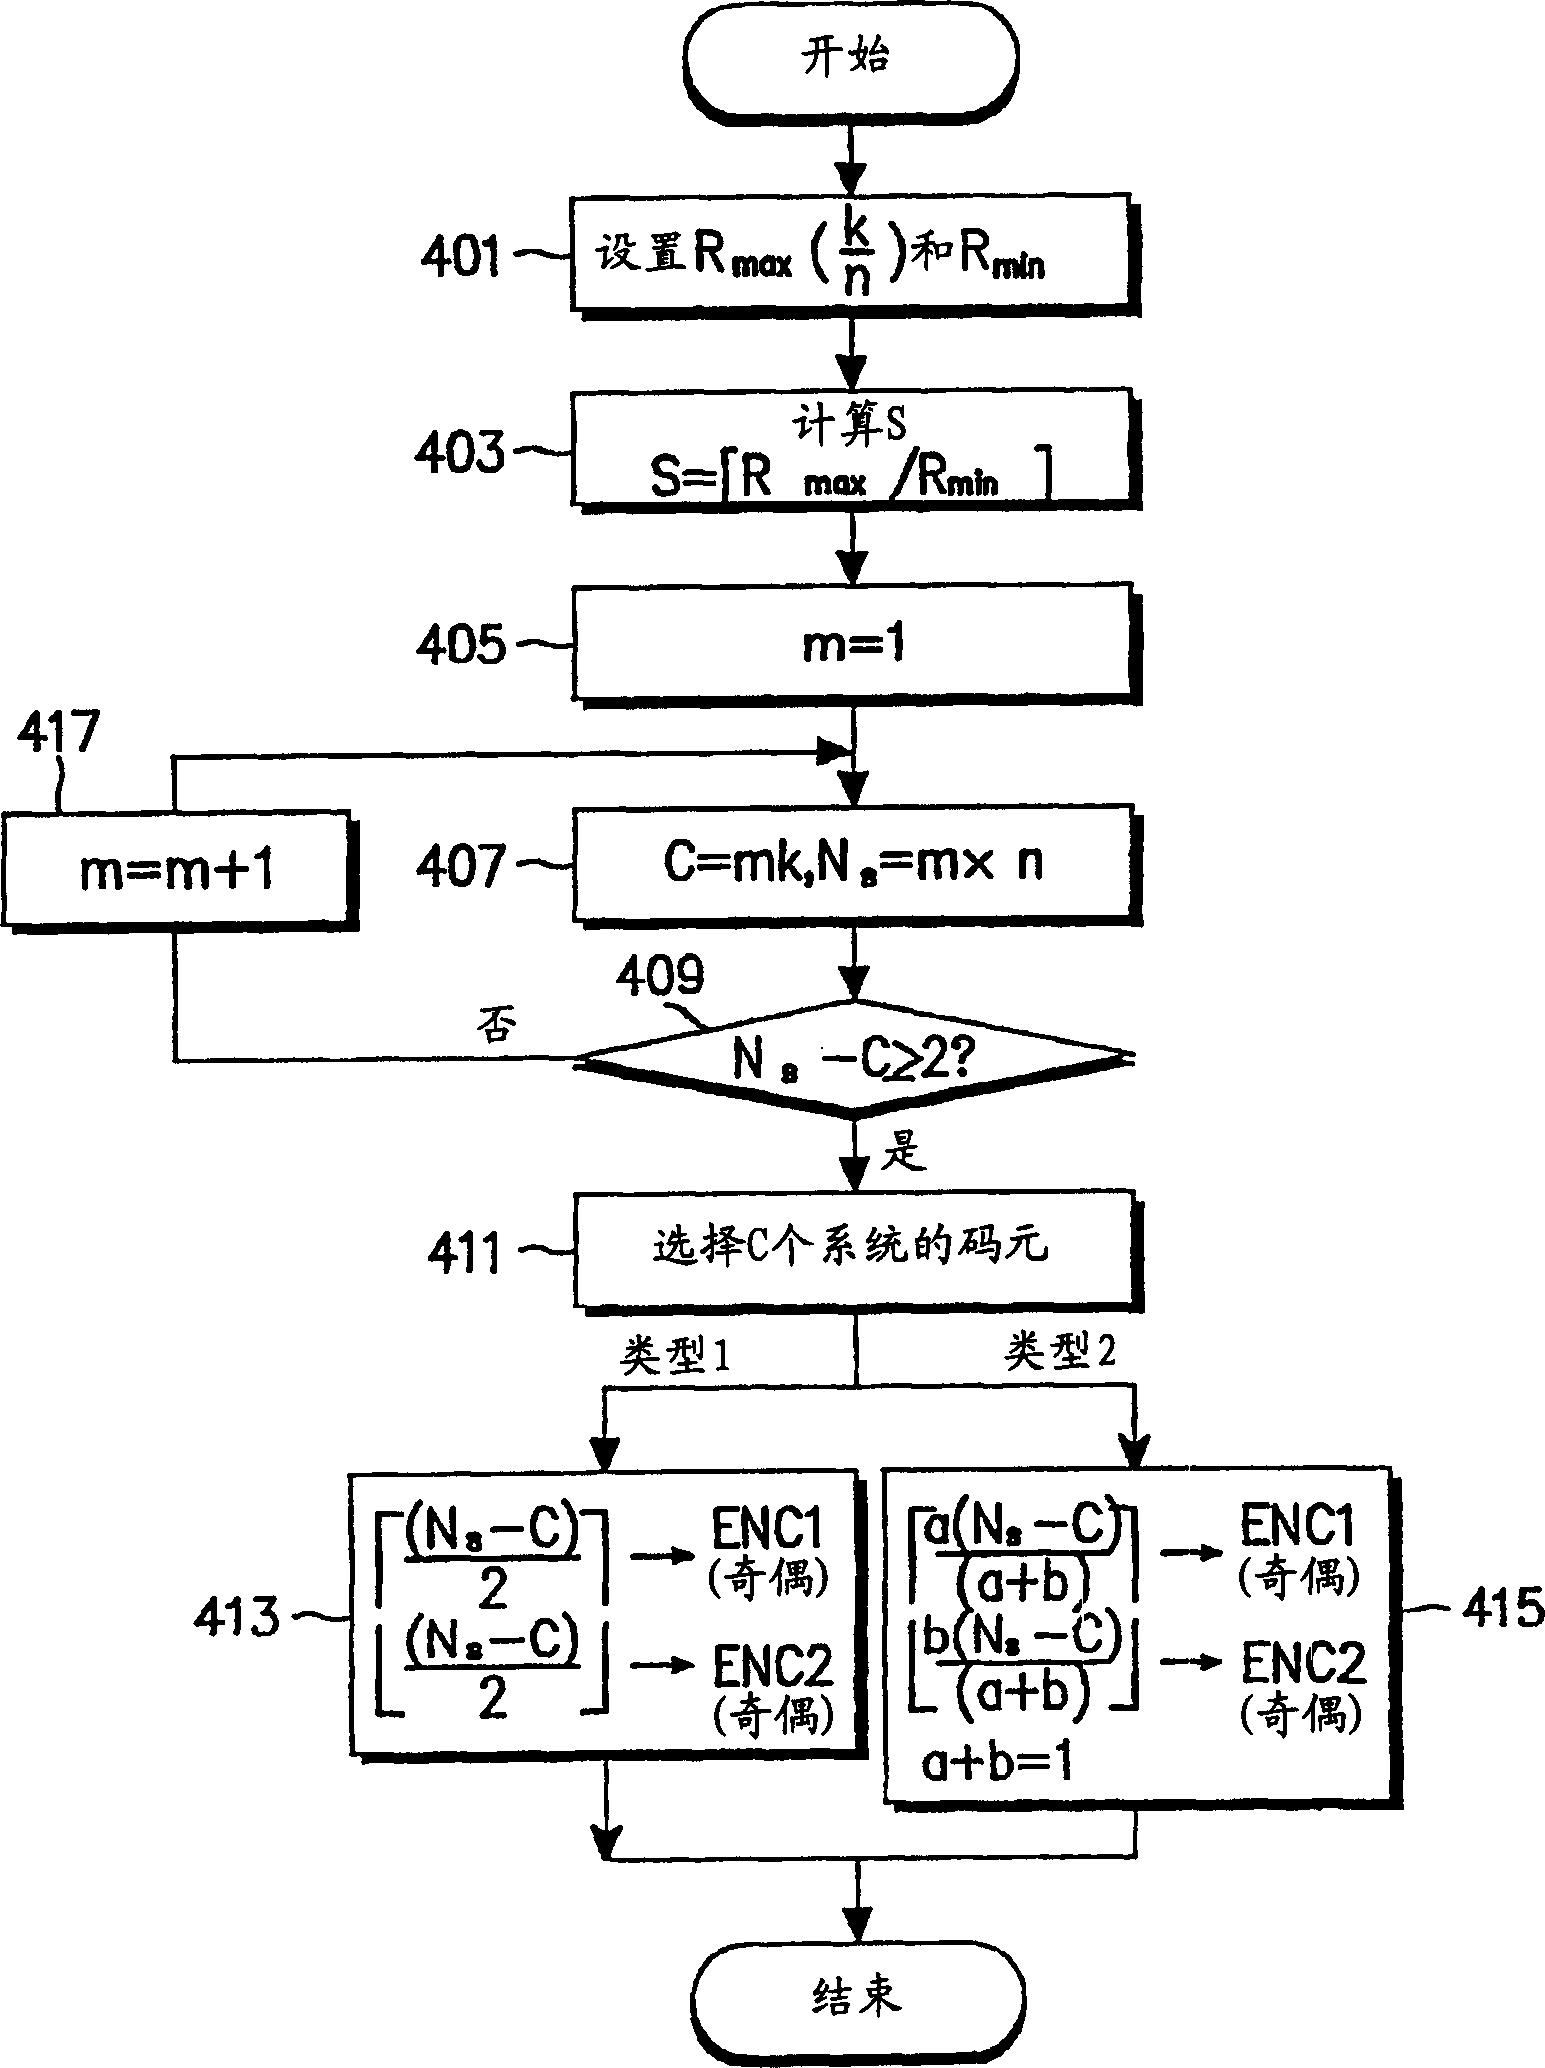 Transmitting packet data in mobile communication systems